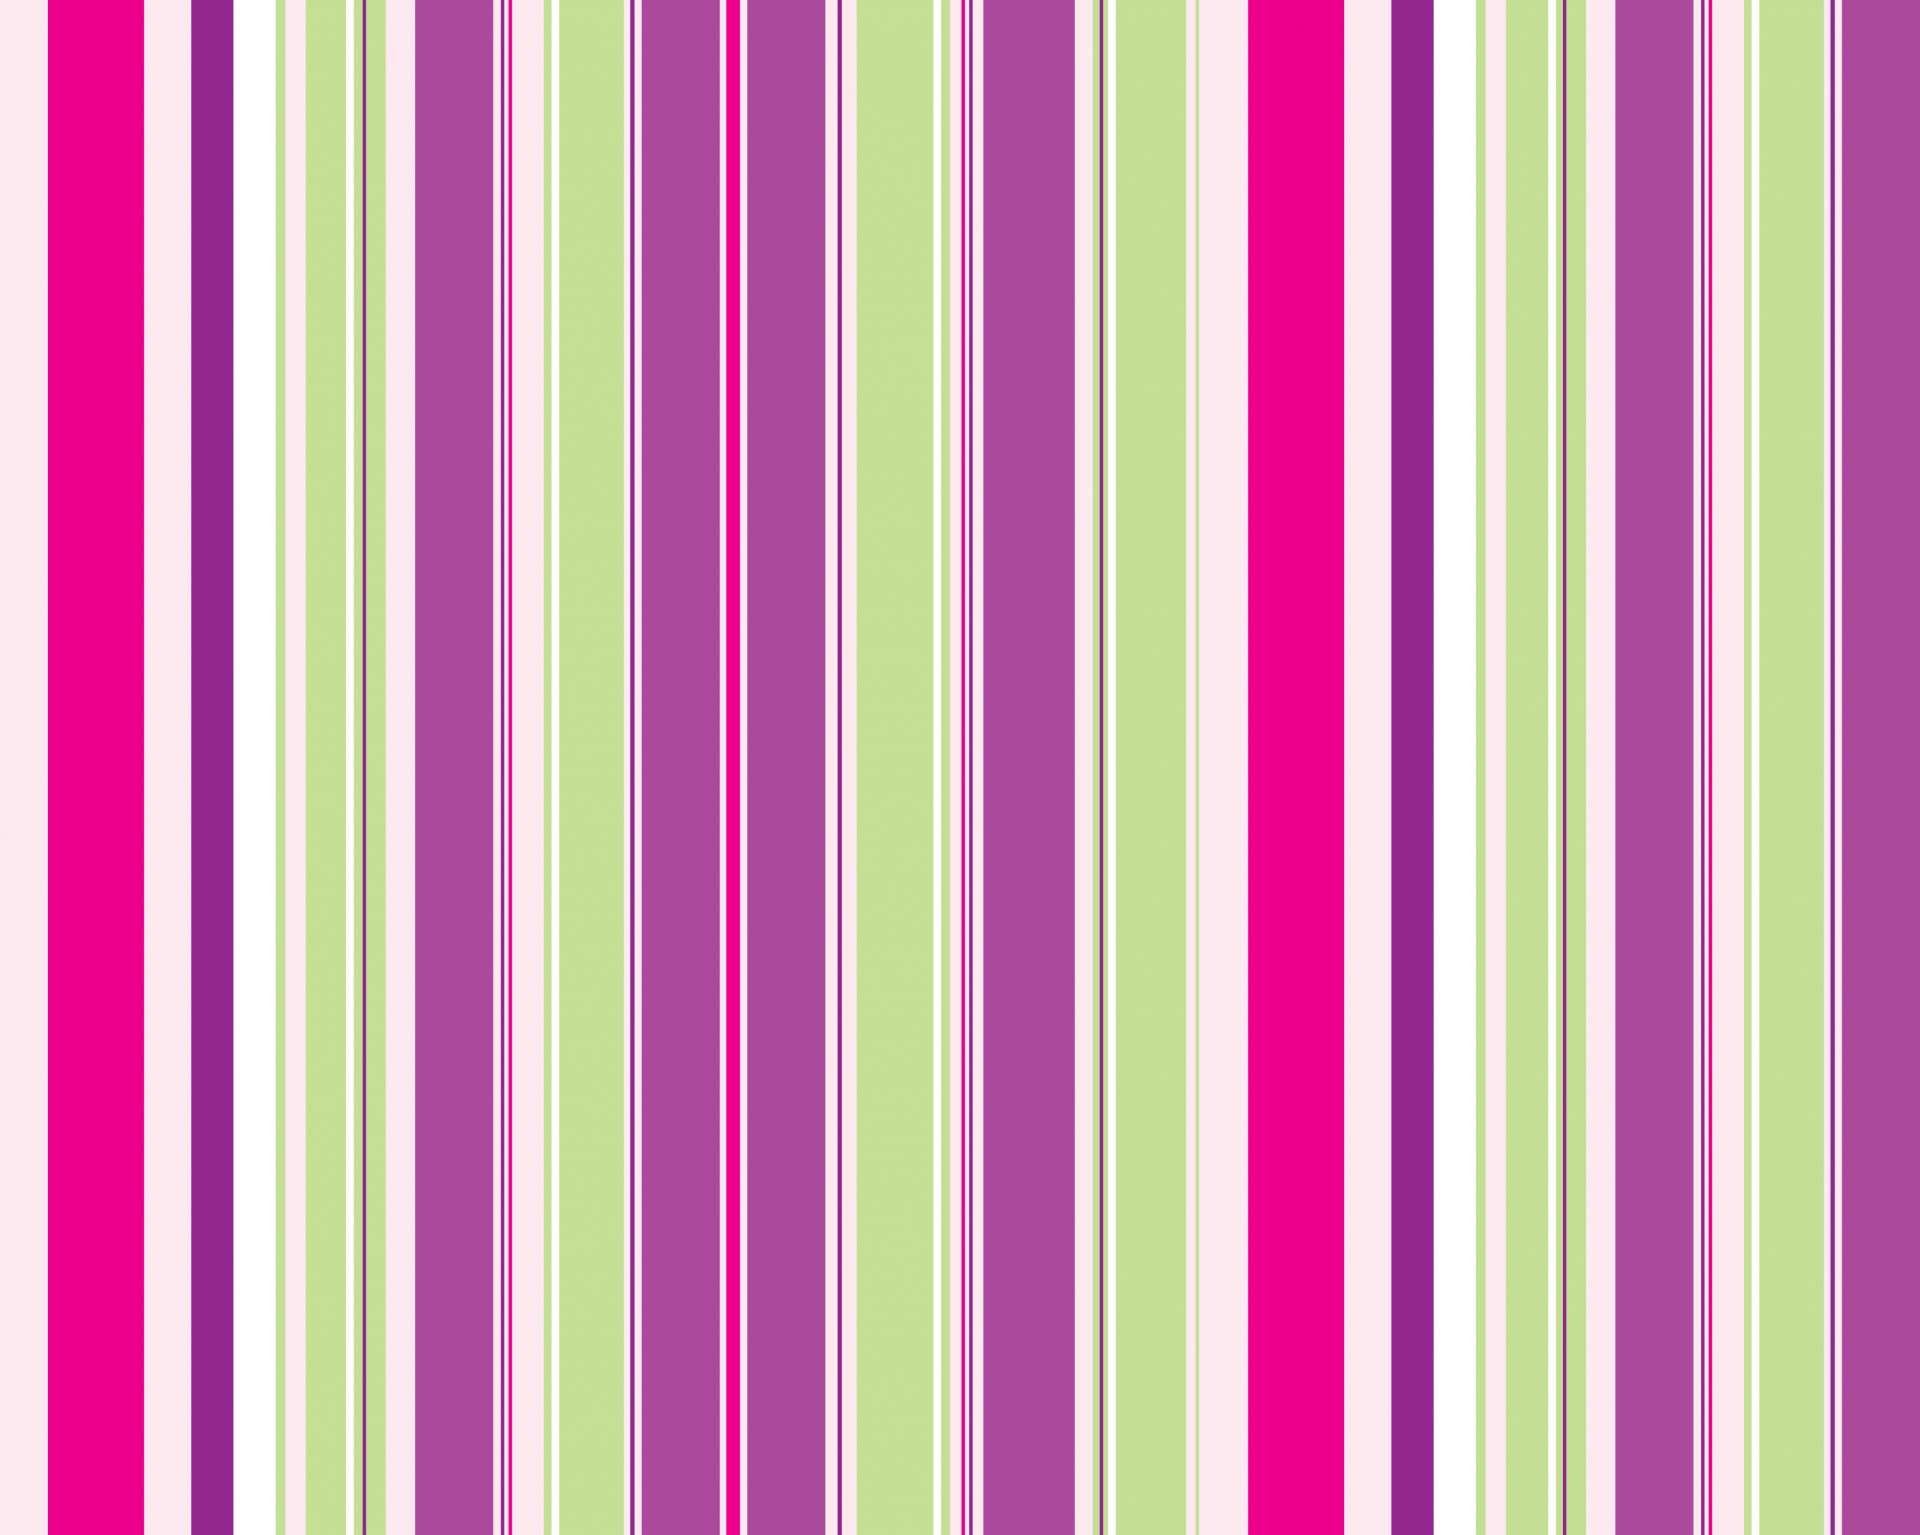  simple green stripes background design good for wallpaper background 1920x1535